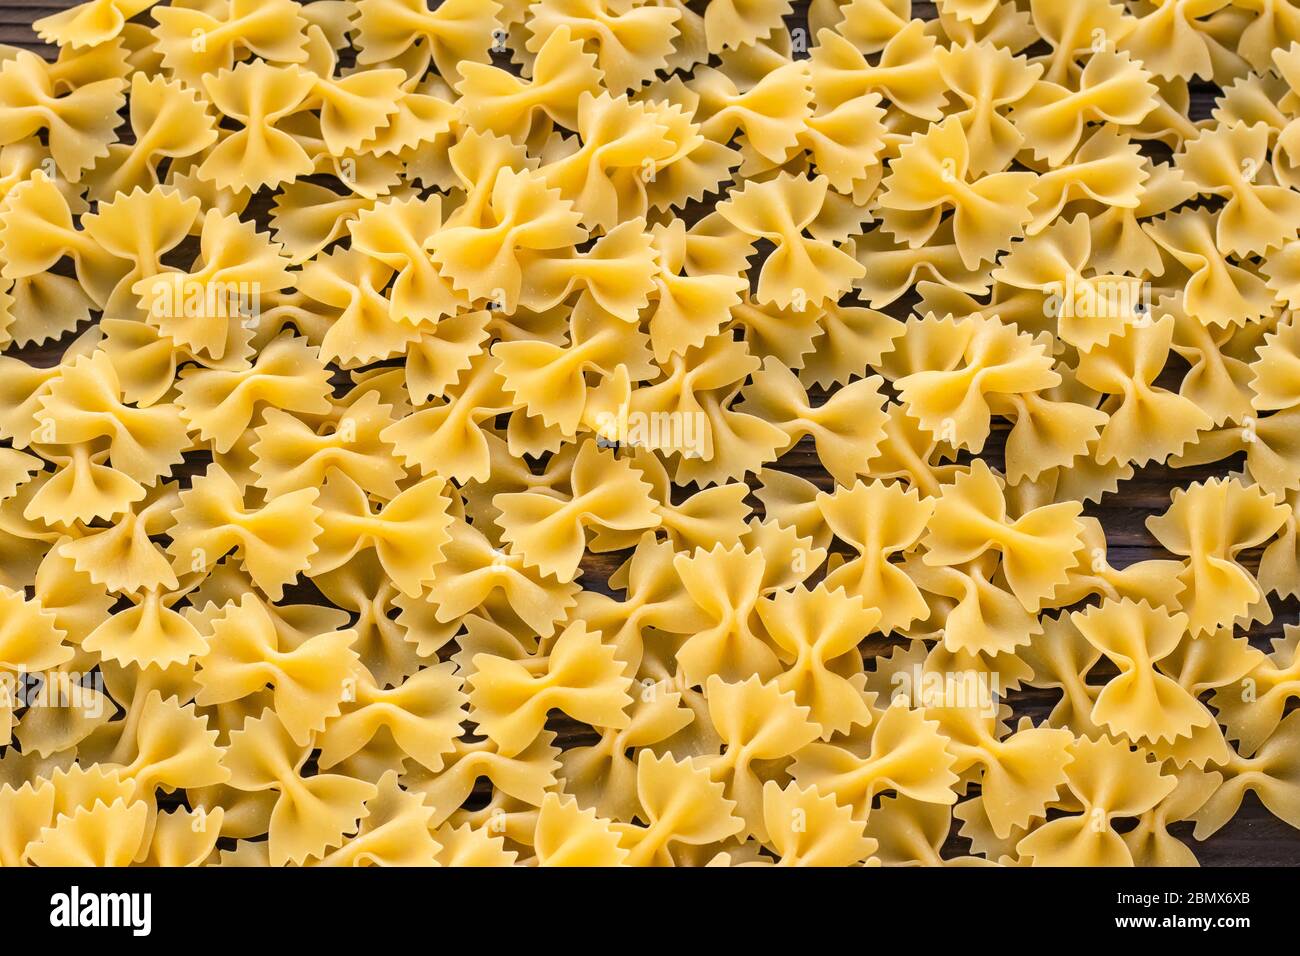 Download Pile Farfalle Yellow Pasta Abstract High Resolution Stock Photography And Images Alamy Yellowimages Mockups